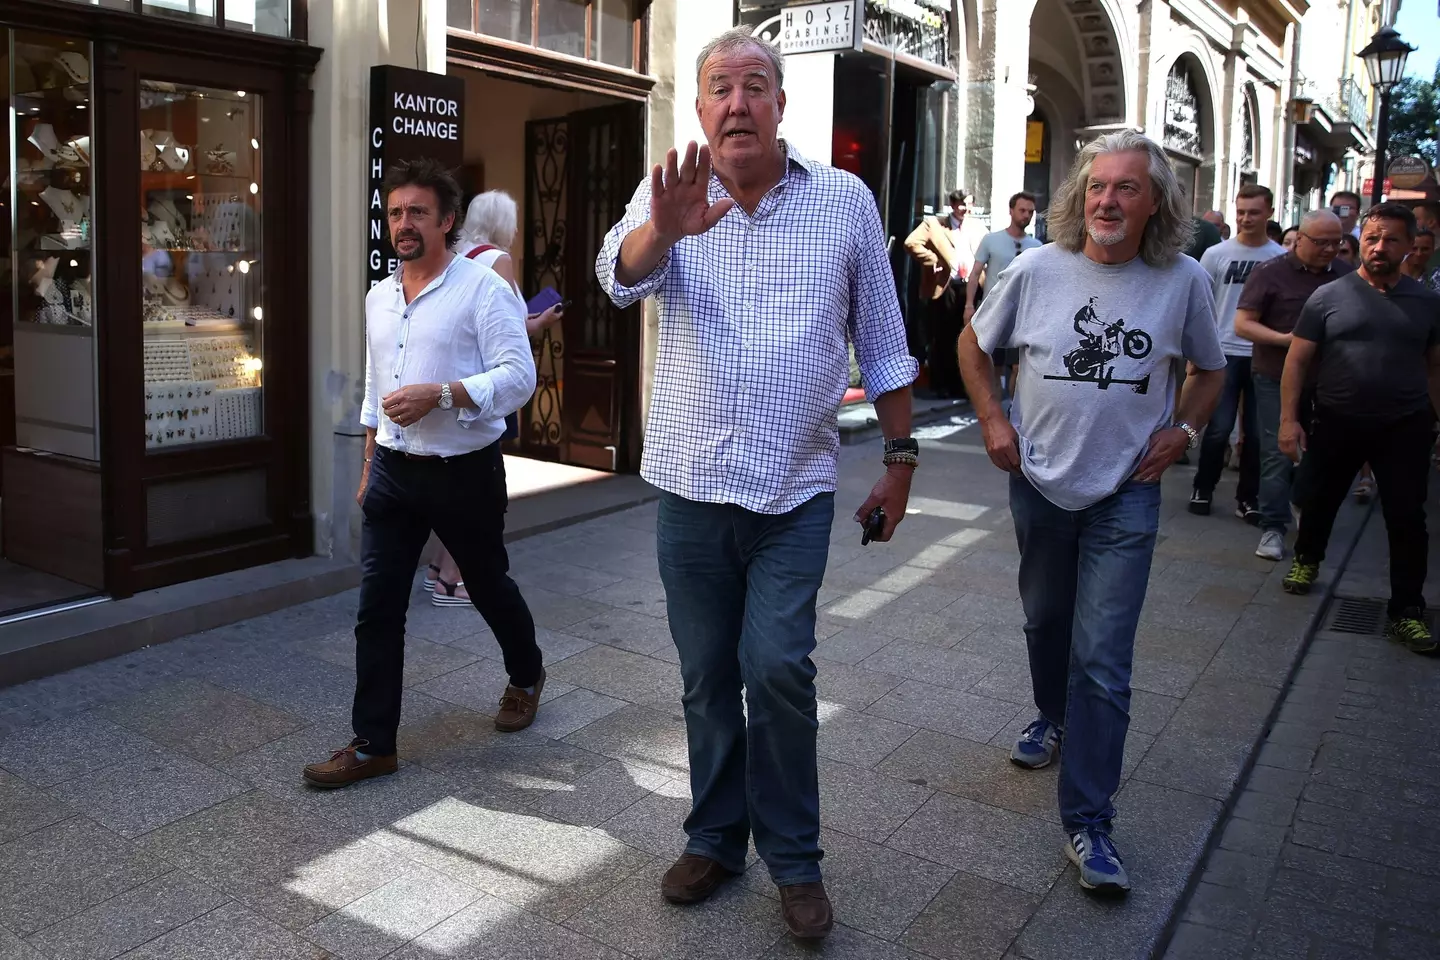 Clarkson and his cronies parted ways with Top Gear in 2015 following steak-gate.